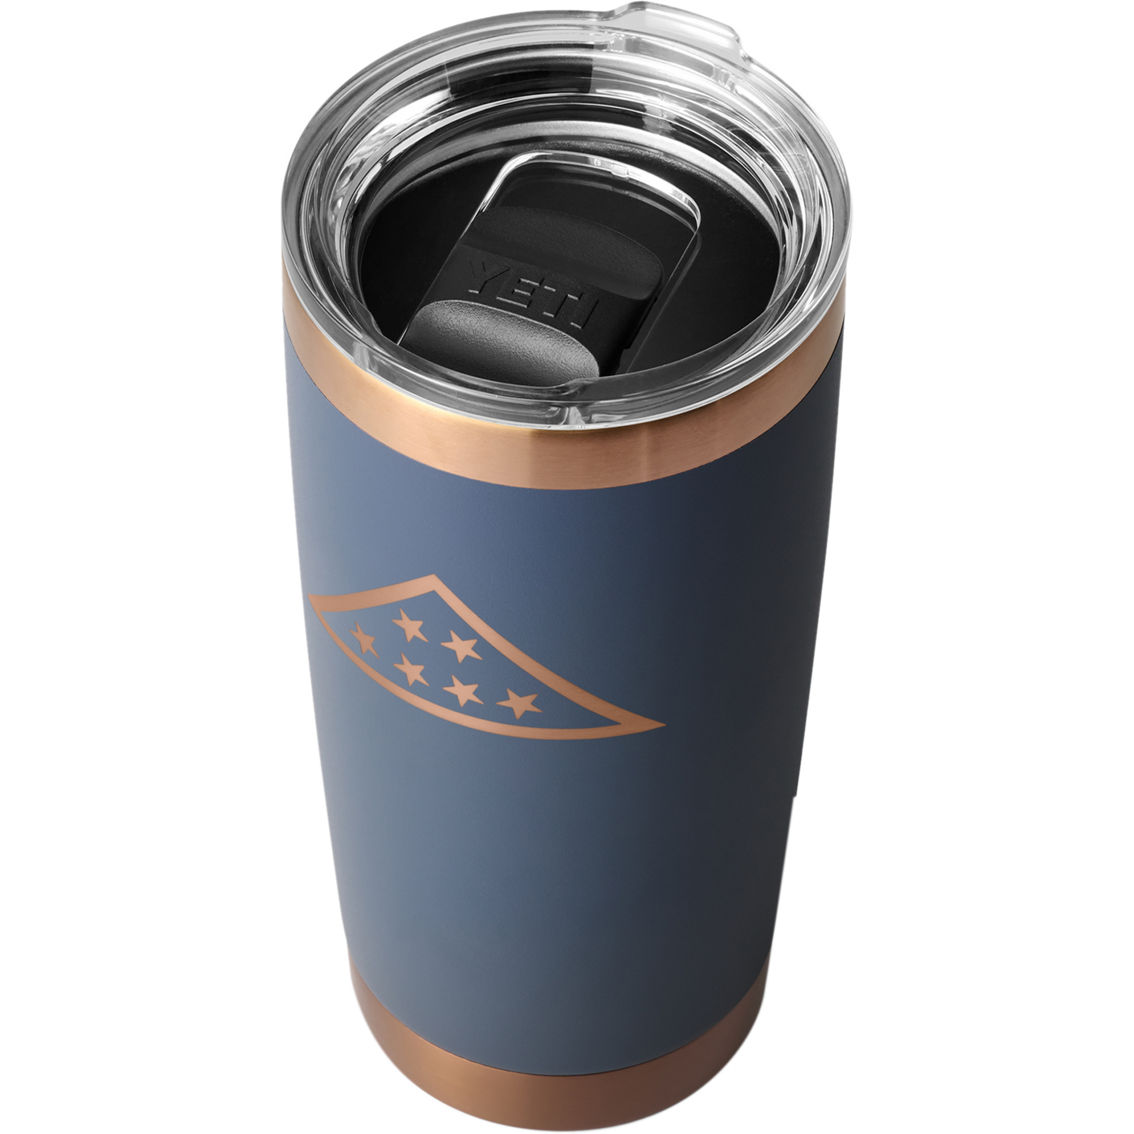 YETI Rambler 8 oz Stackable Cup, Stainless Steel, Vacuum Insulated Espresso  Cup with MagSlider Lid, Black